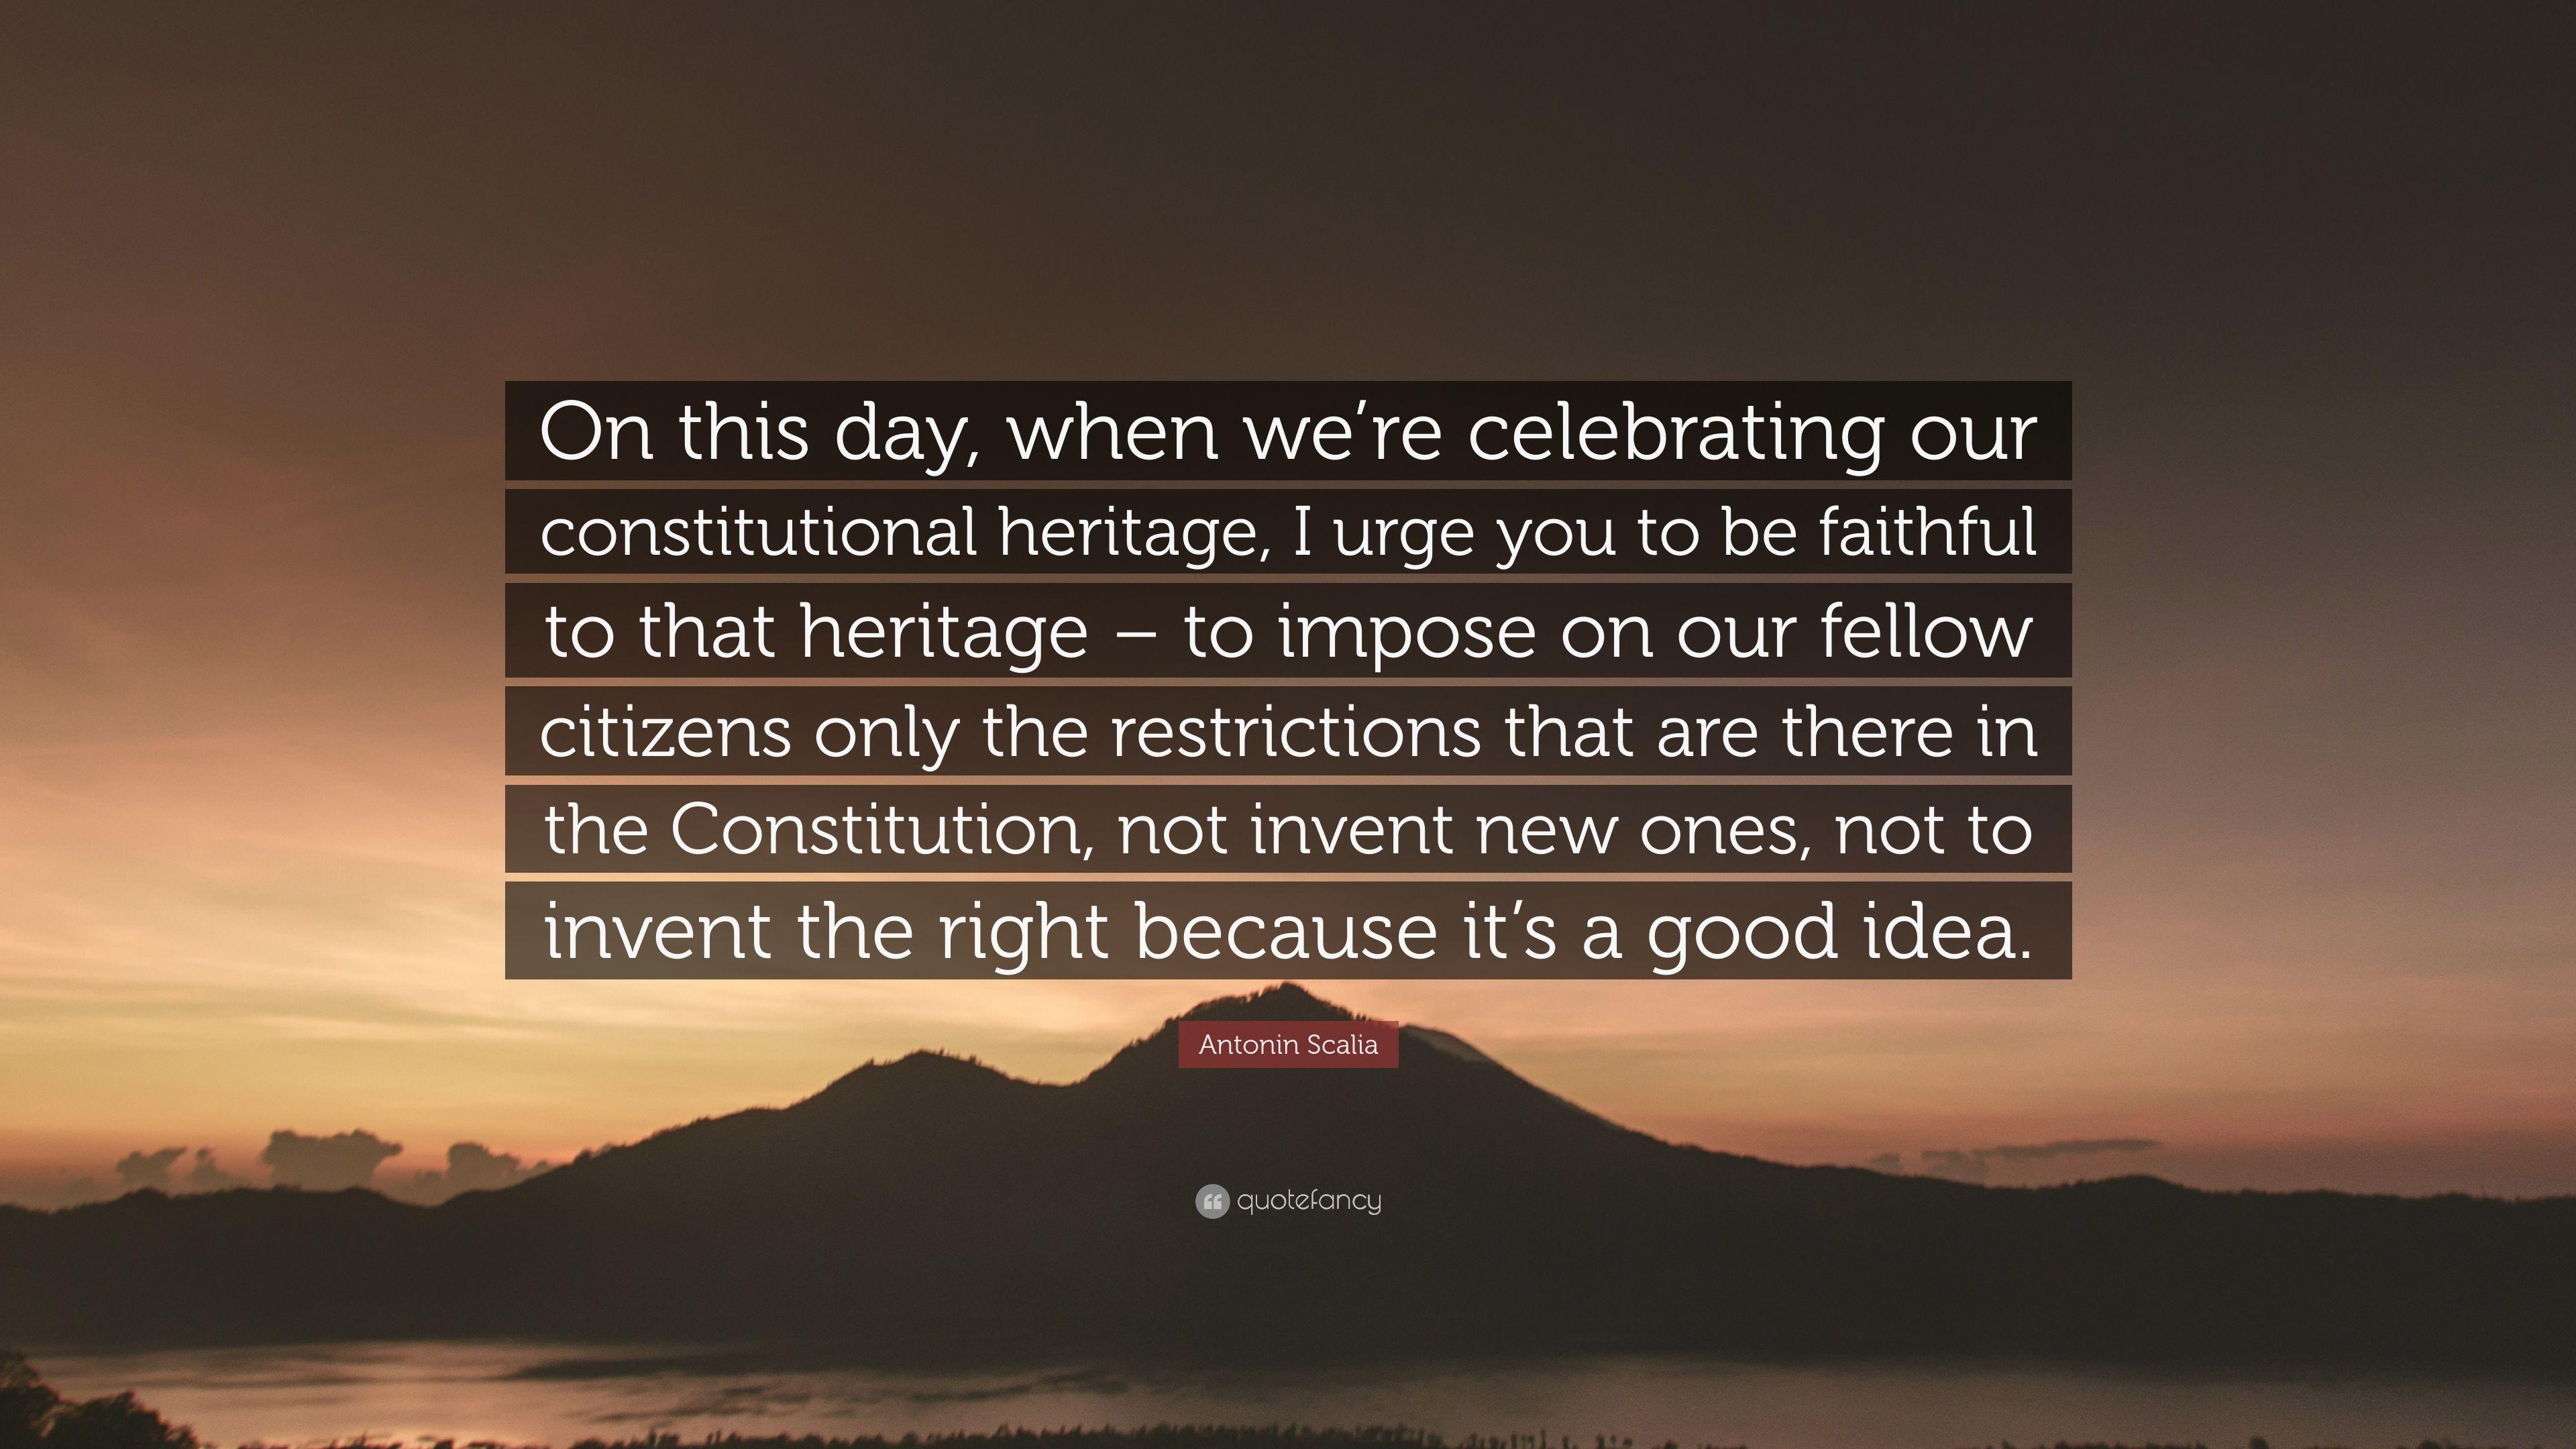 Antonin Scalia Quote: “On this day, when we're celebrating our